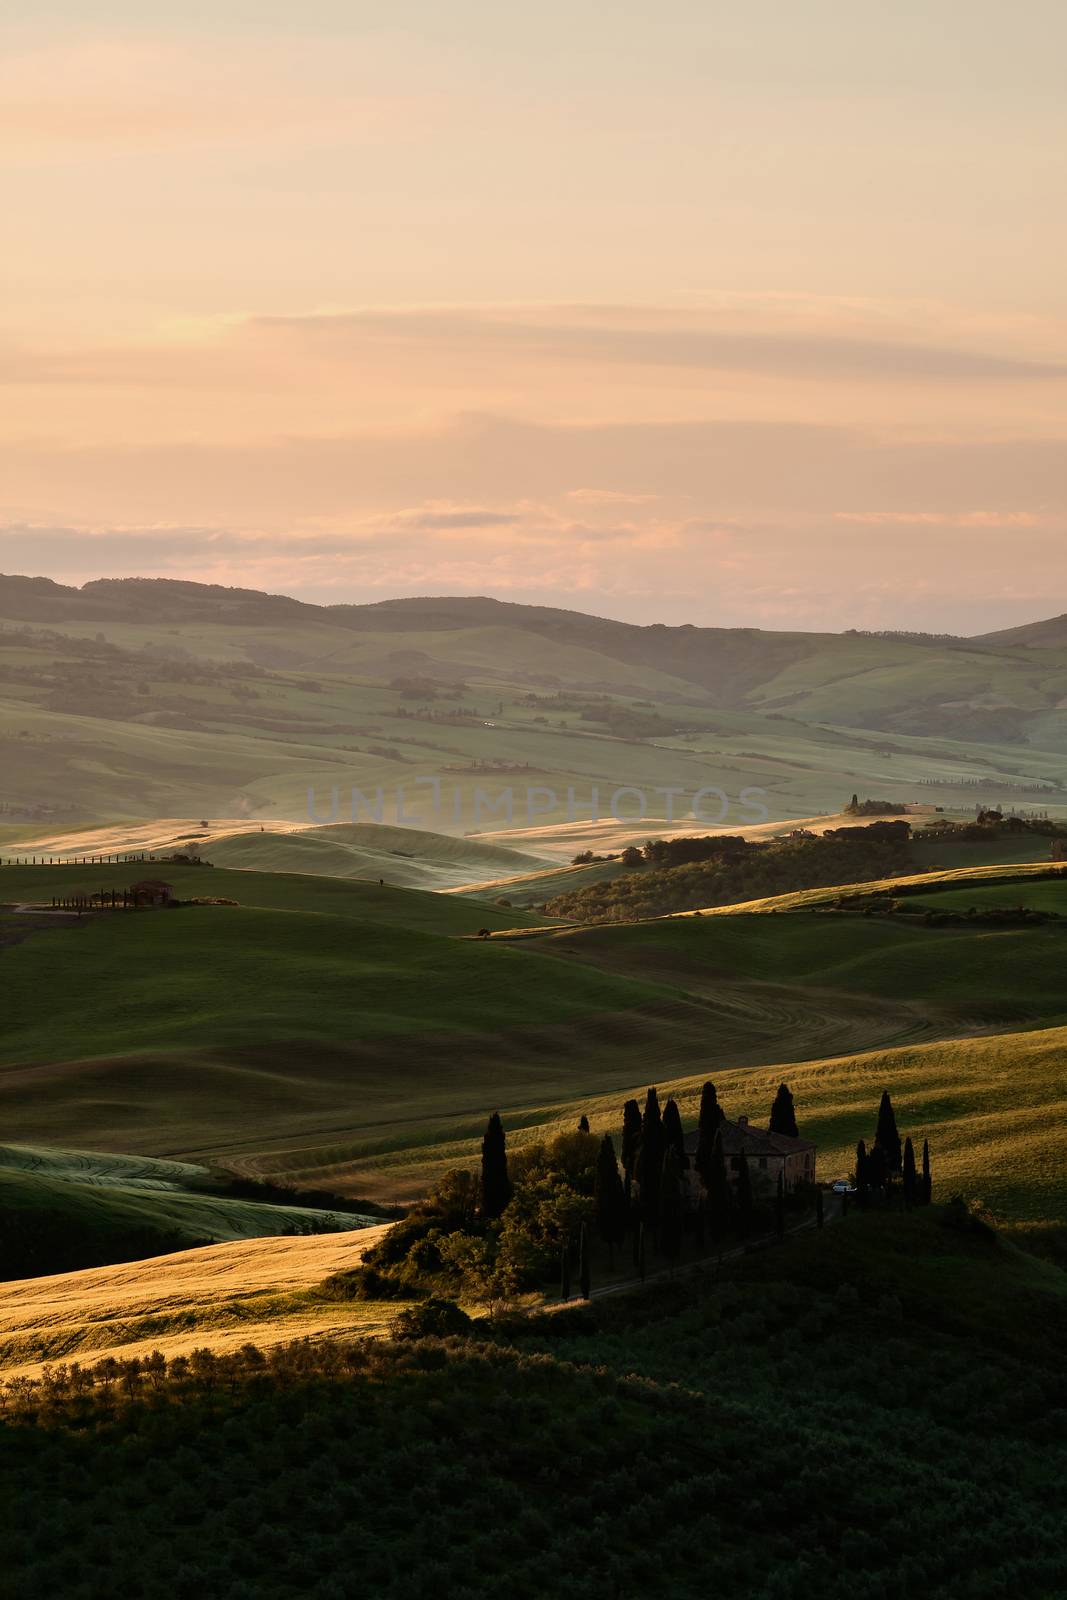 Sunrise in Val d'Orcia, Tuscany by LuigiMorbidelli